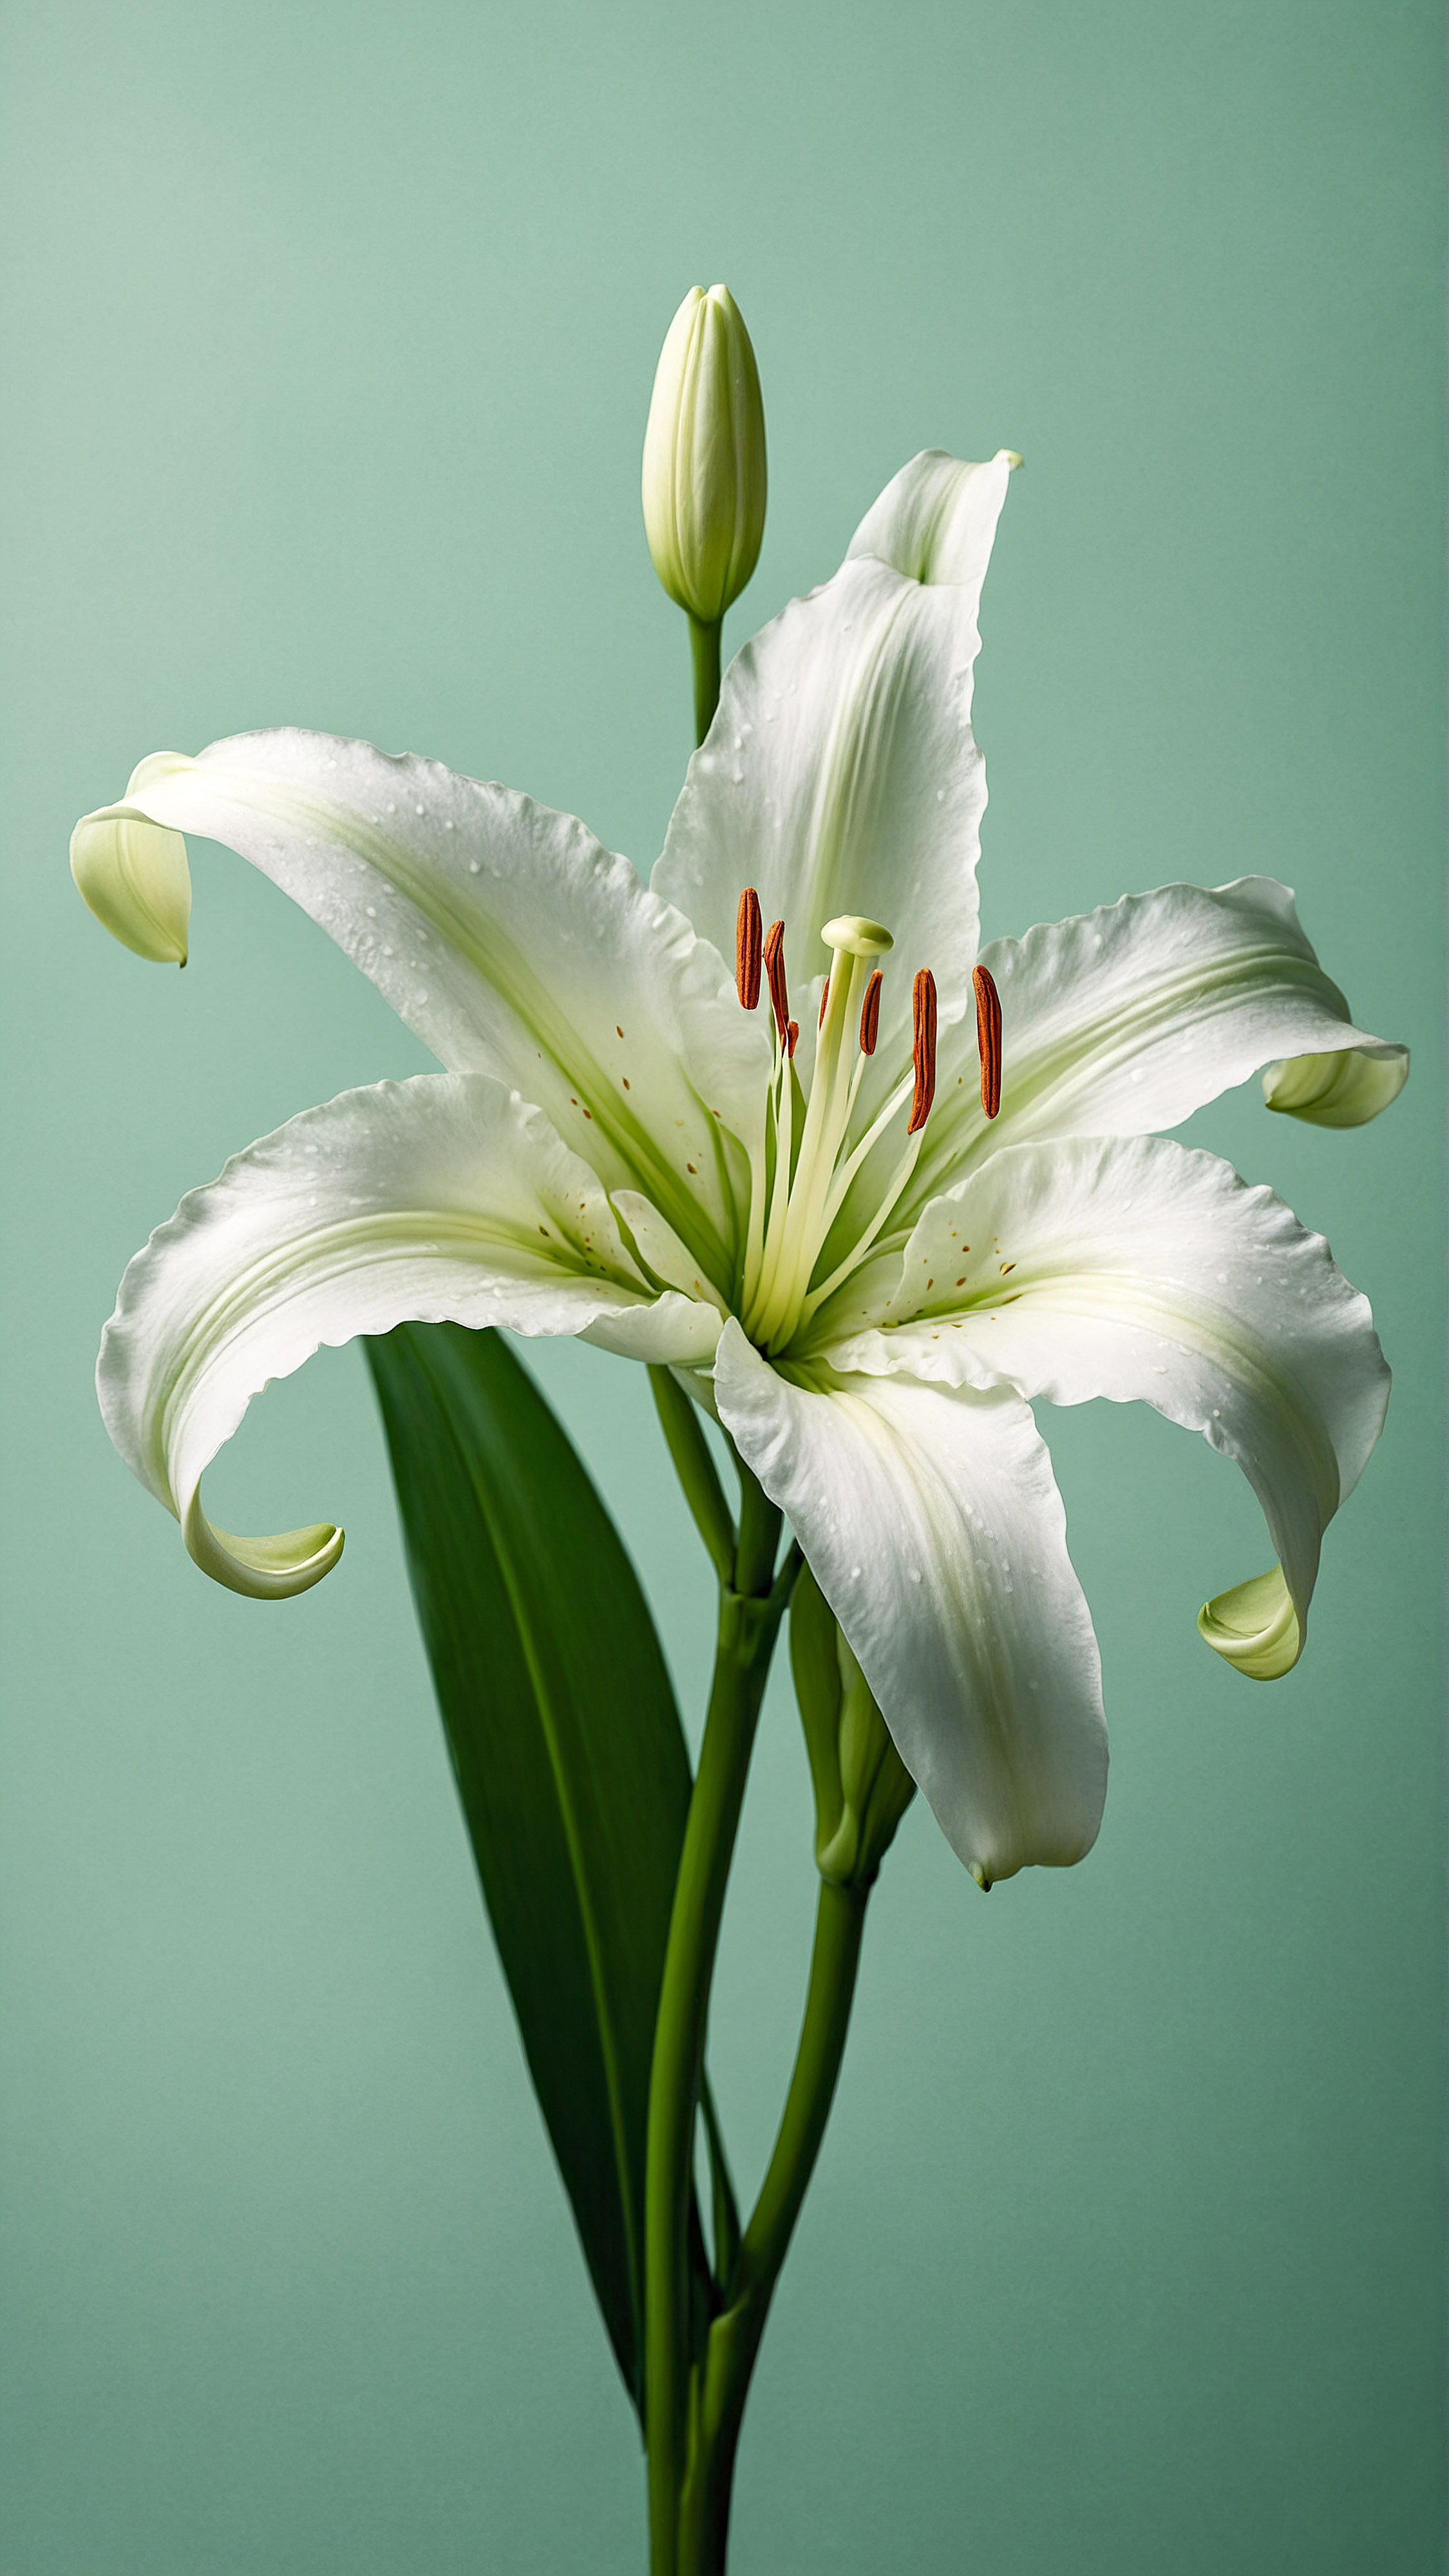 Admire the elegance of an HD aesthetic wallpaper for your iPhone, featuring an illustration of a white lily on a pale green background.